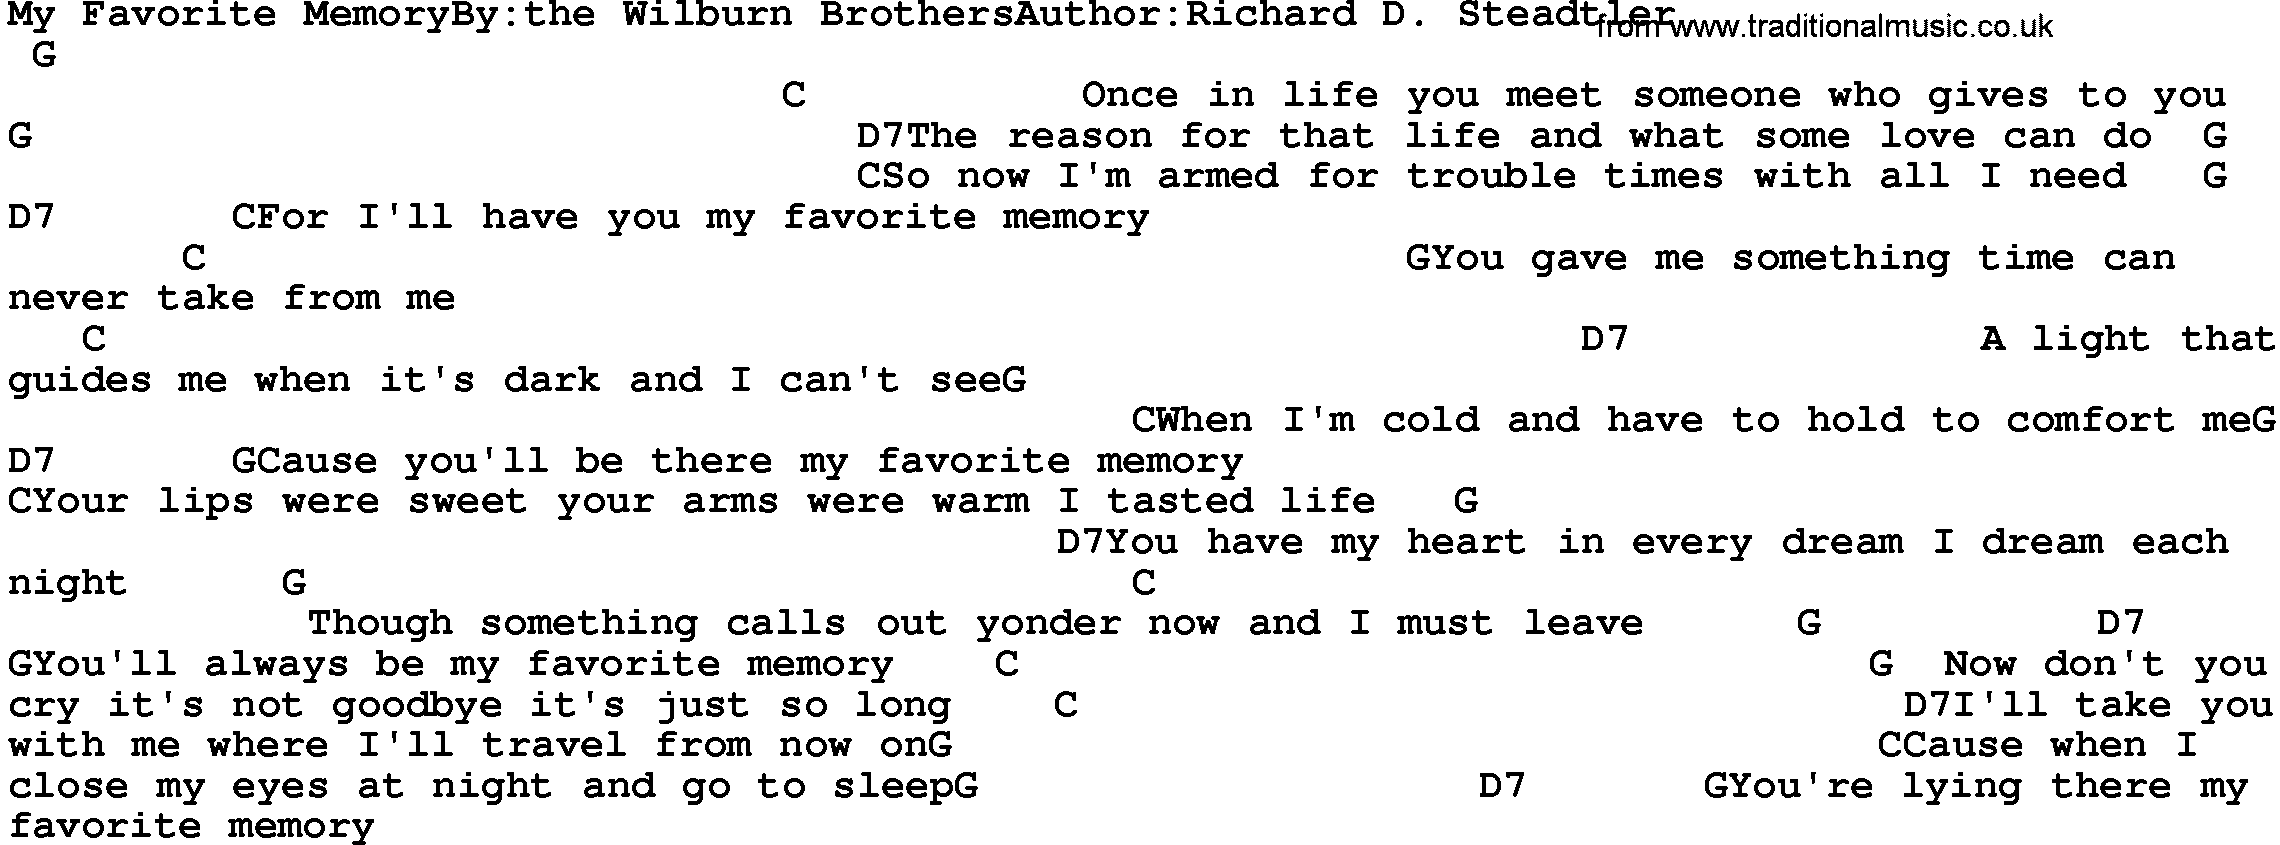 Country music song: My Favorite Memory-Wilburn Brothers lyrics and chords